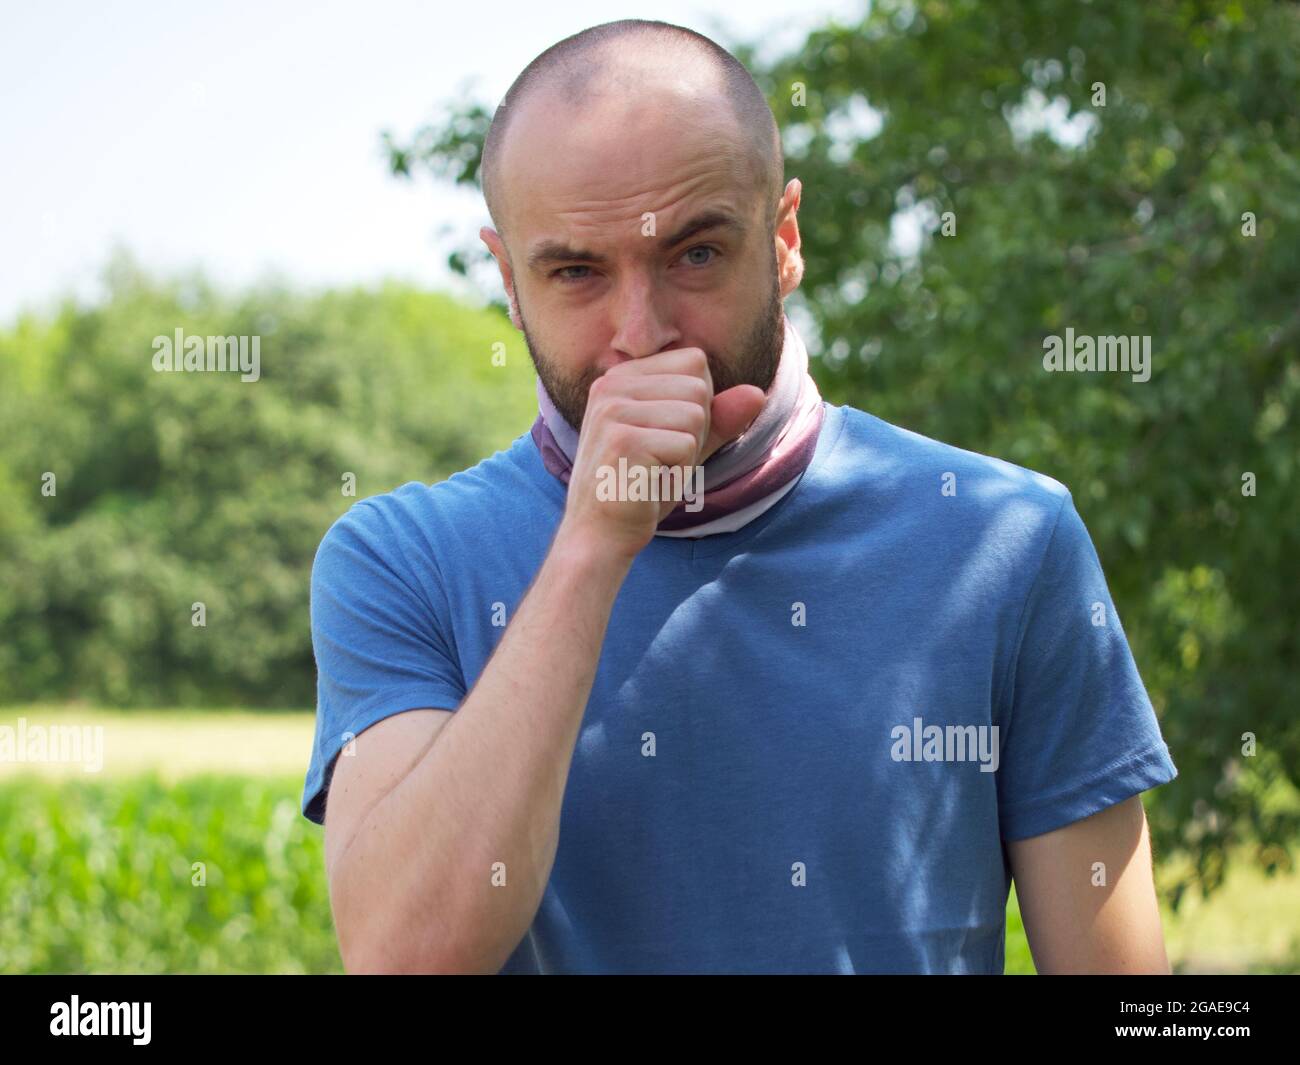 A bald man in a blue T-shirt coughs into a fist. Stock Photo